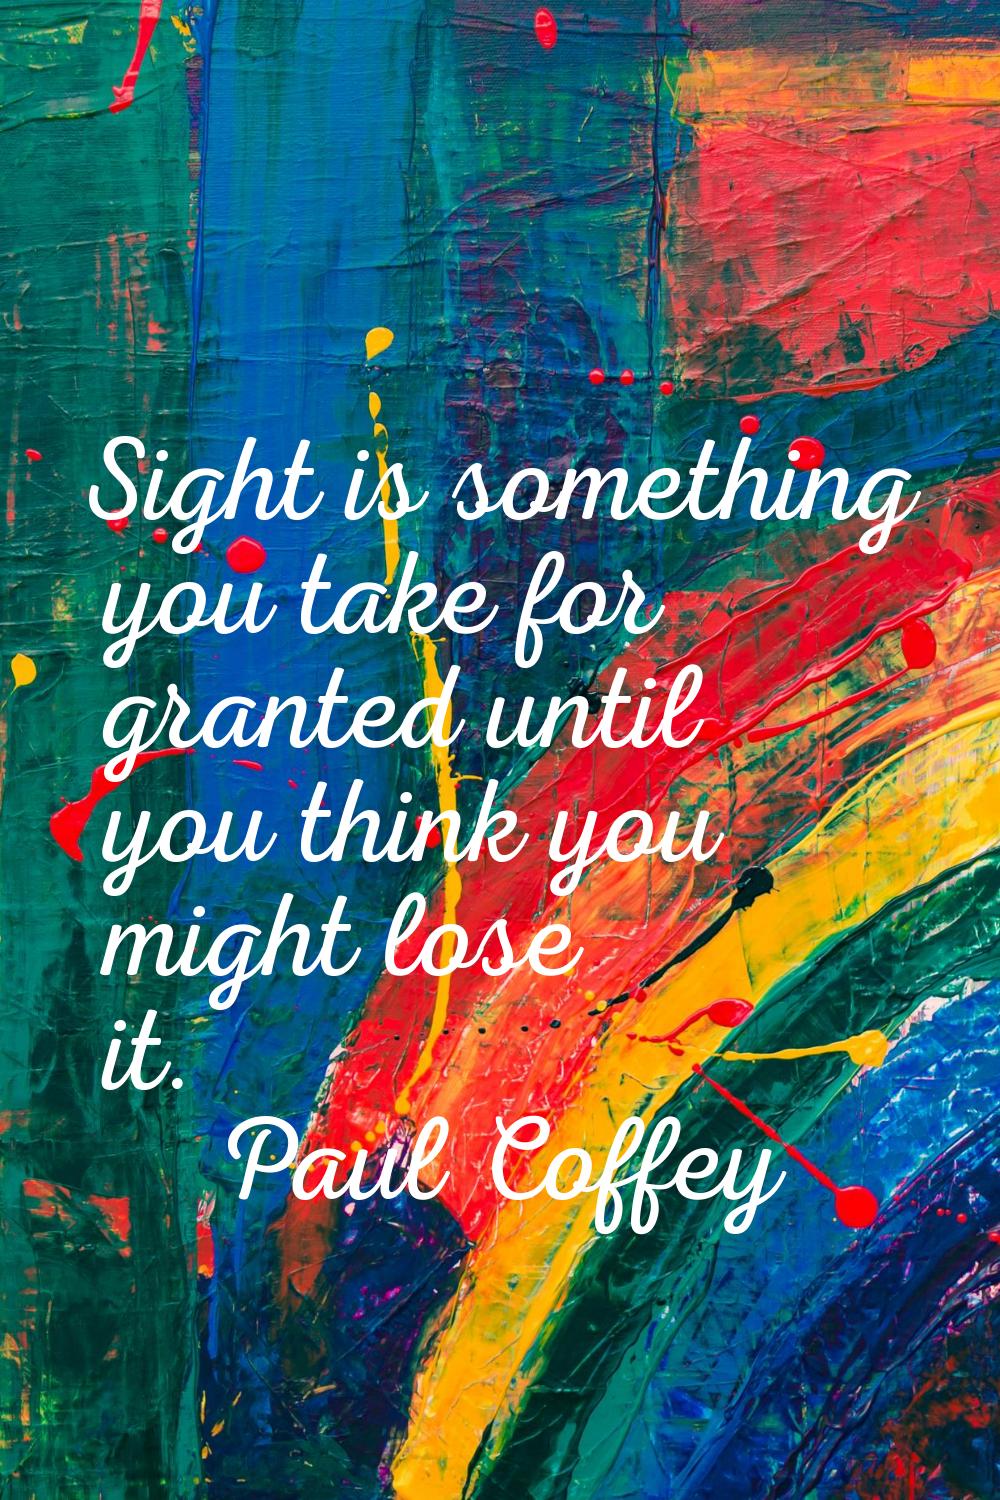 Sight is something you take for granted until you think you might lose it.